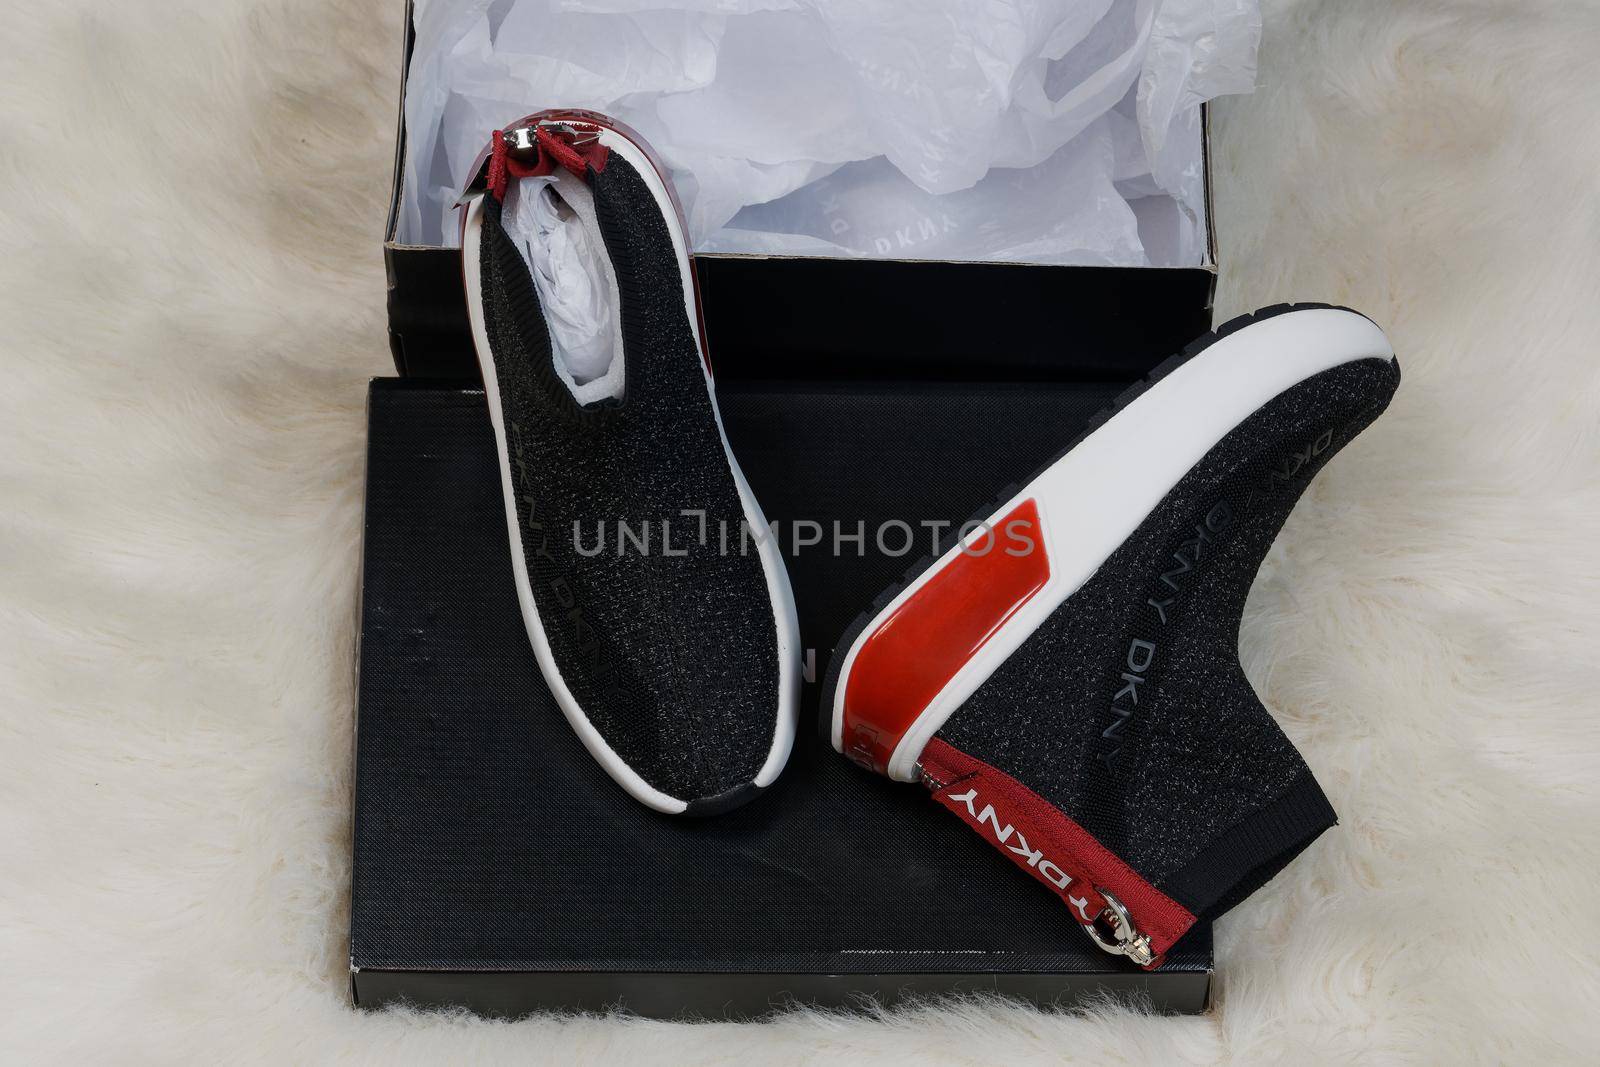 Display of delivered package containing a pair of DKNY fashion modern shoes with company logo.